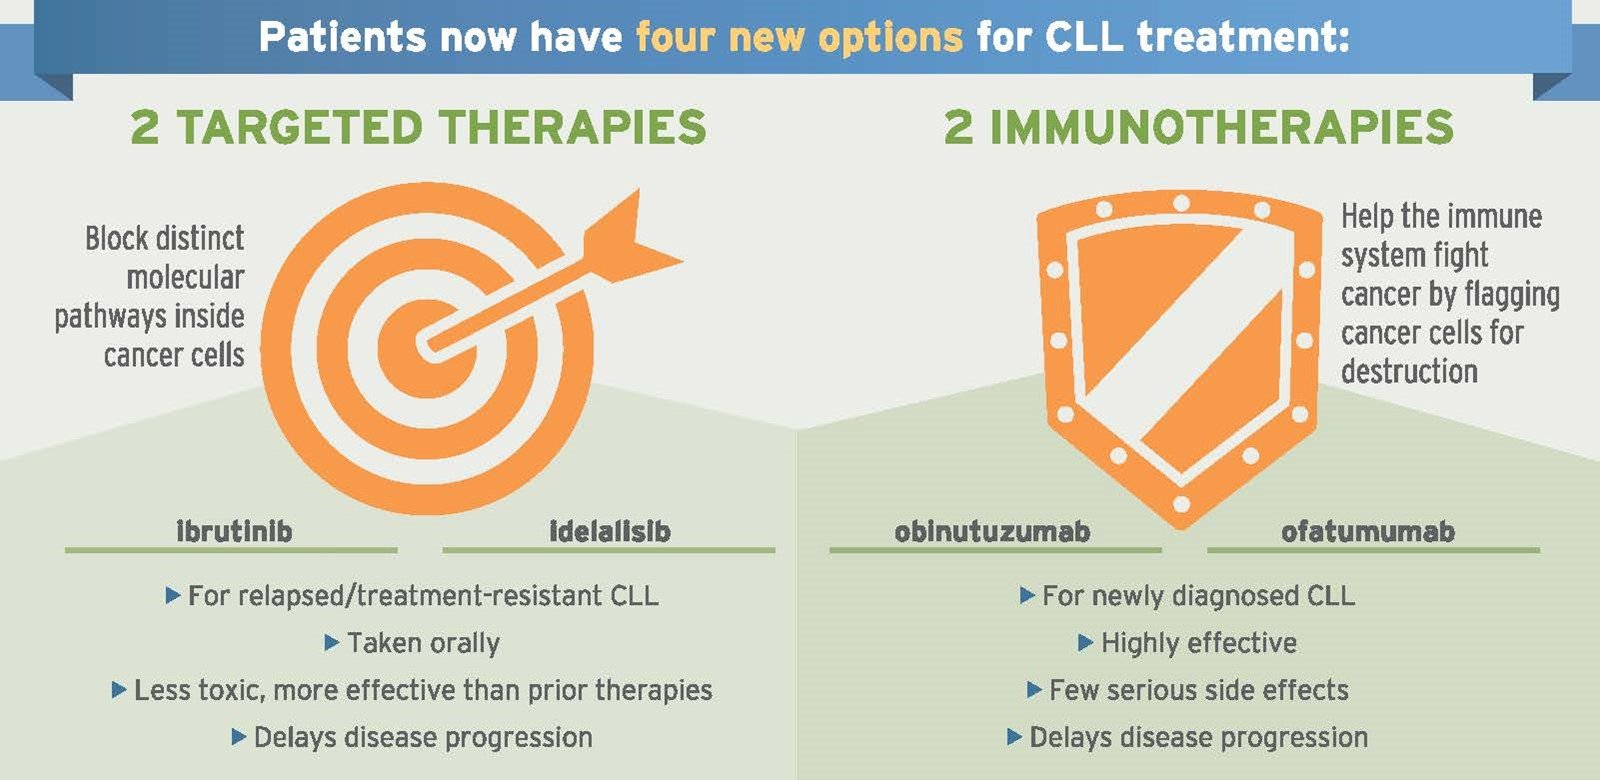 Patients now have four new options for CLL treatment: 2 Targeted Therapies and 2 Immunotherapies